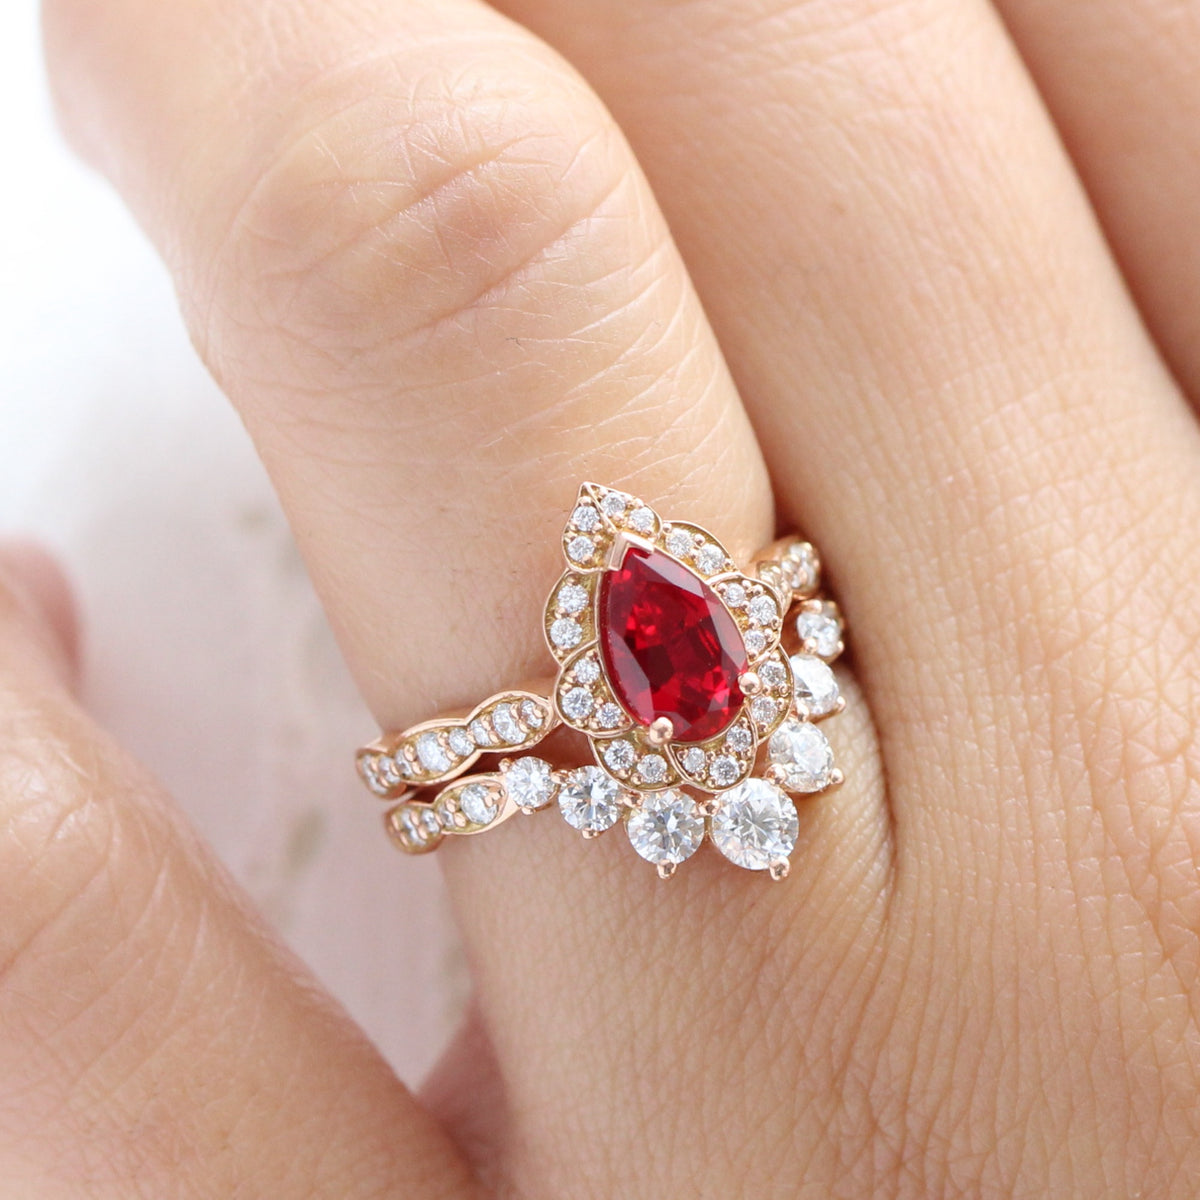 vintage halo diamond pear ruby ring stack rose gold curved diamond wedding band la more design jewelry